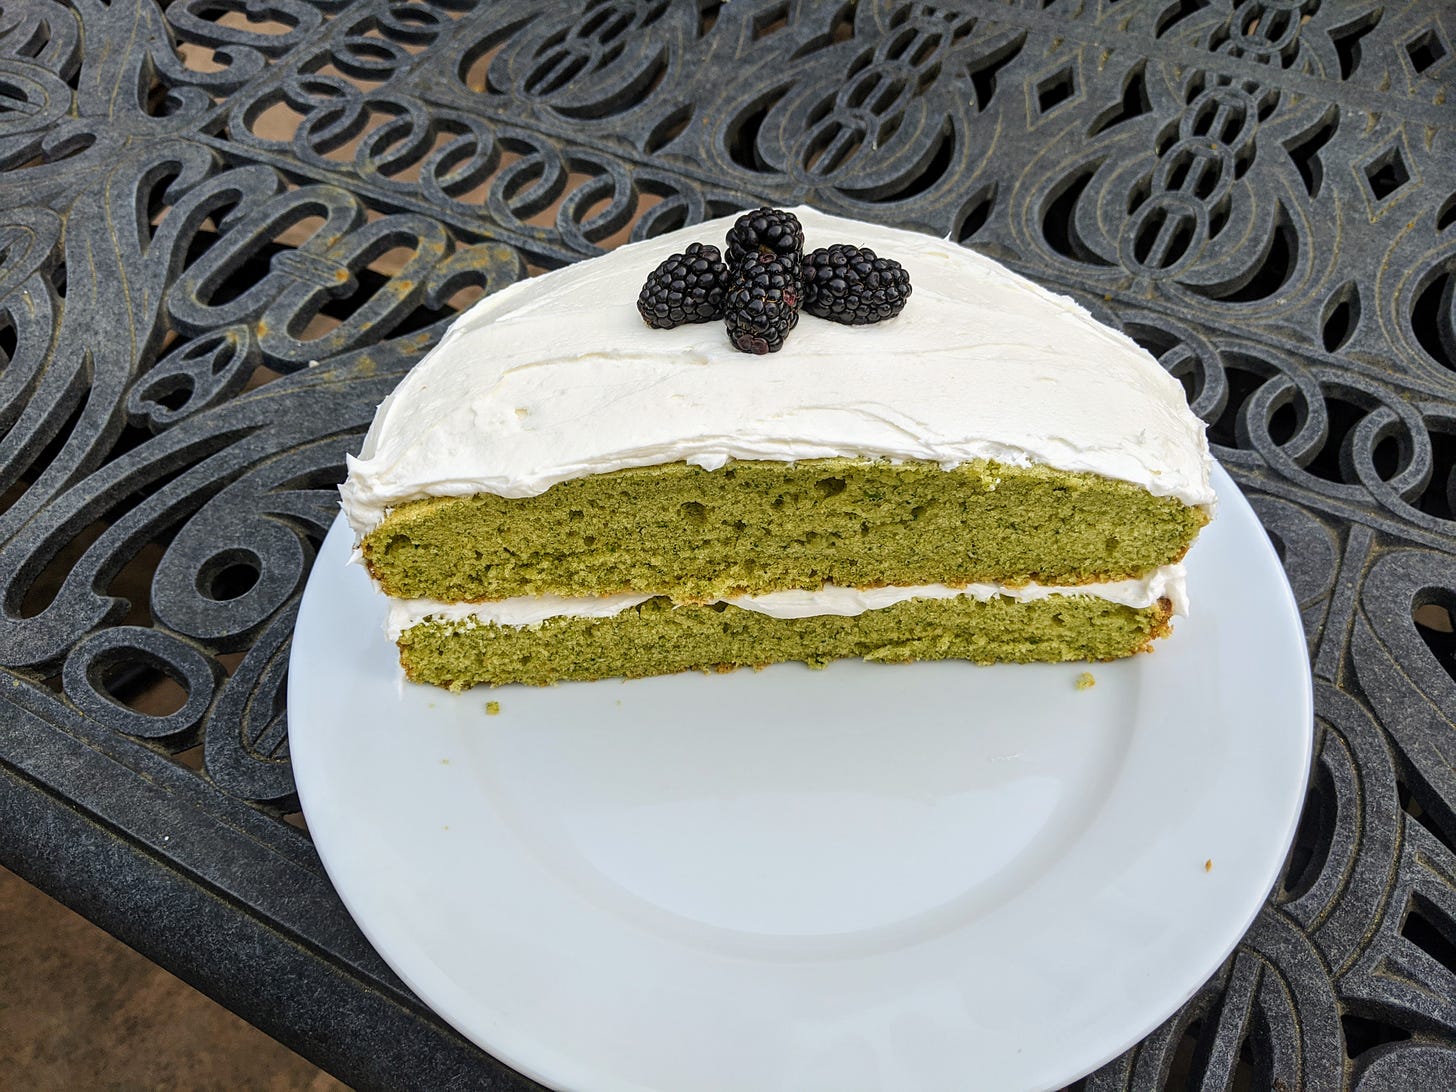 looking down on half a cake with bright green cake layers and white frosting and blackberries decorating the top